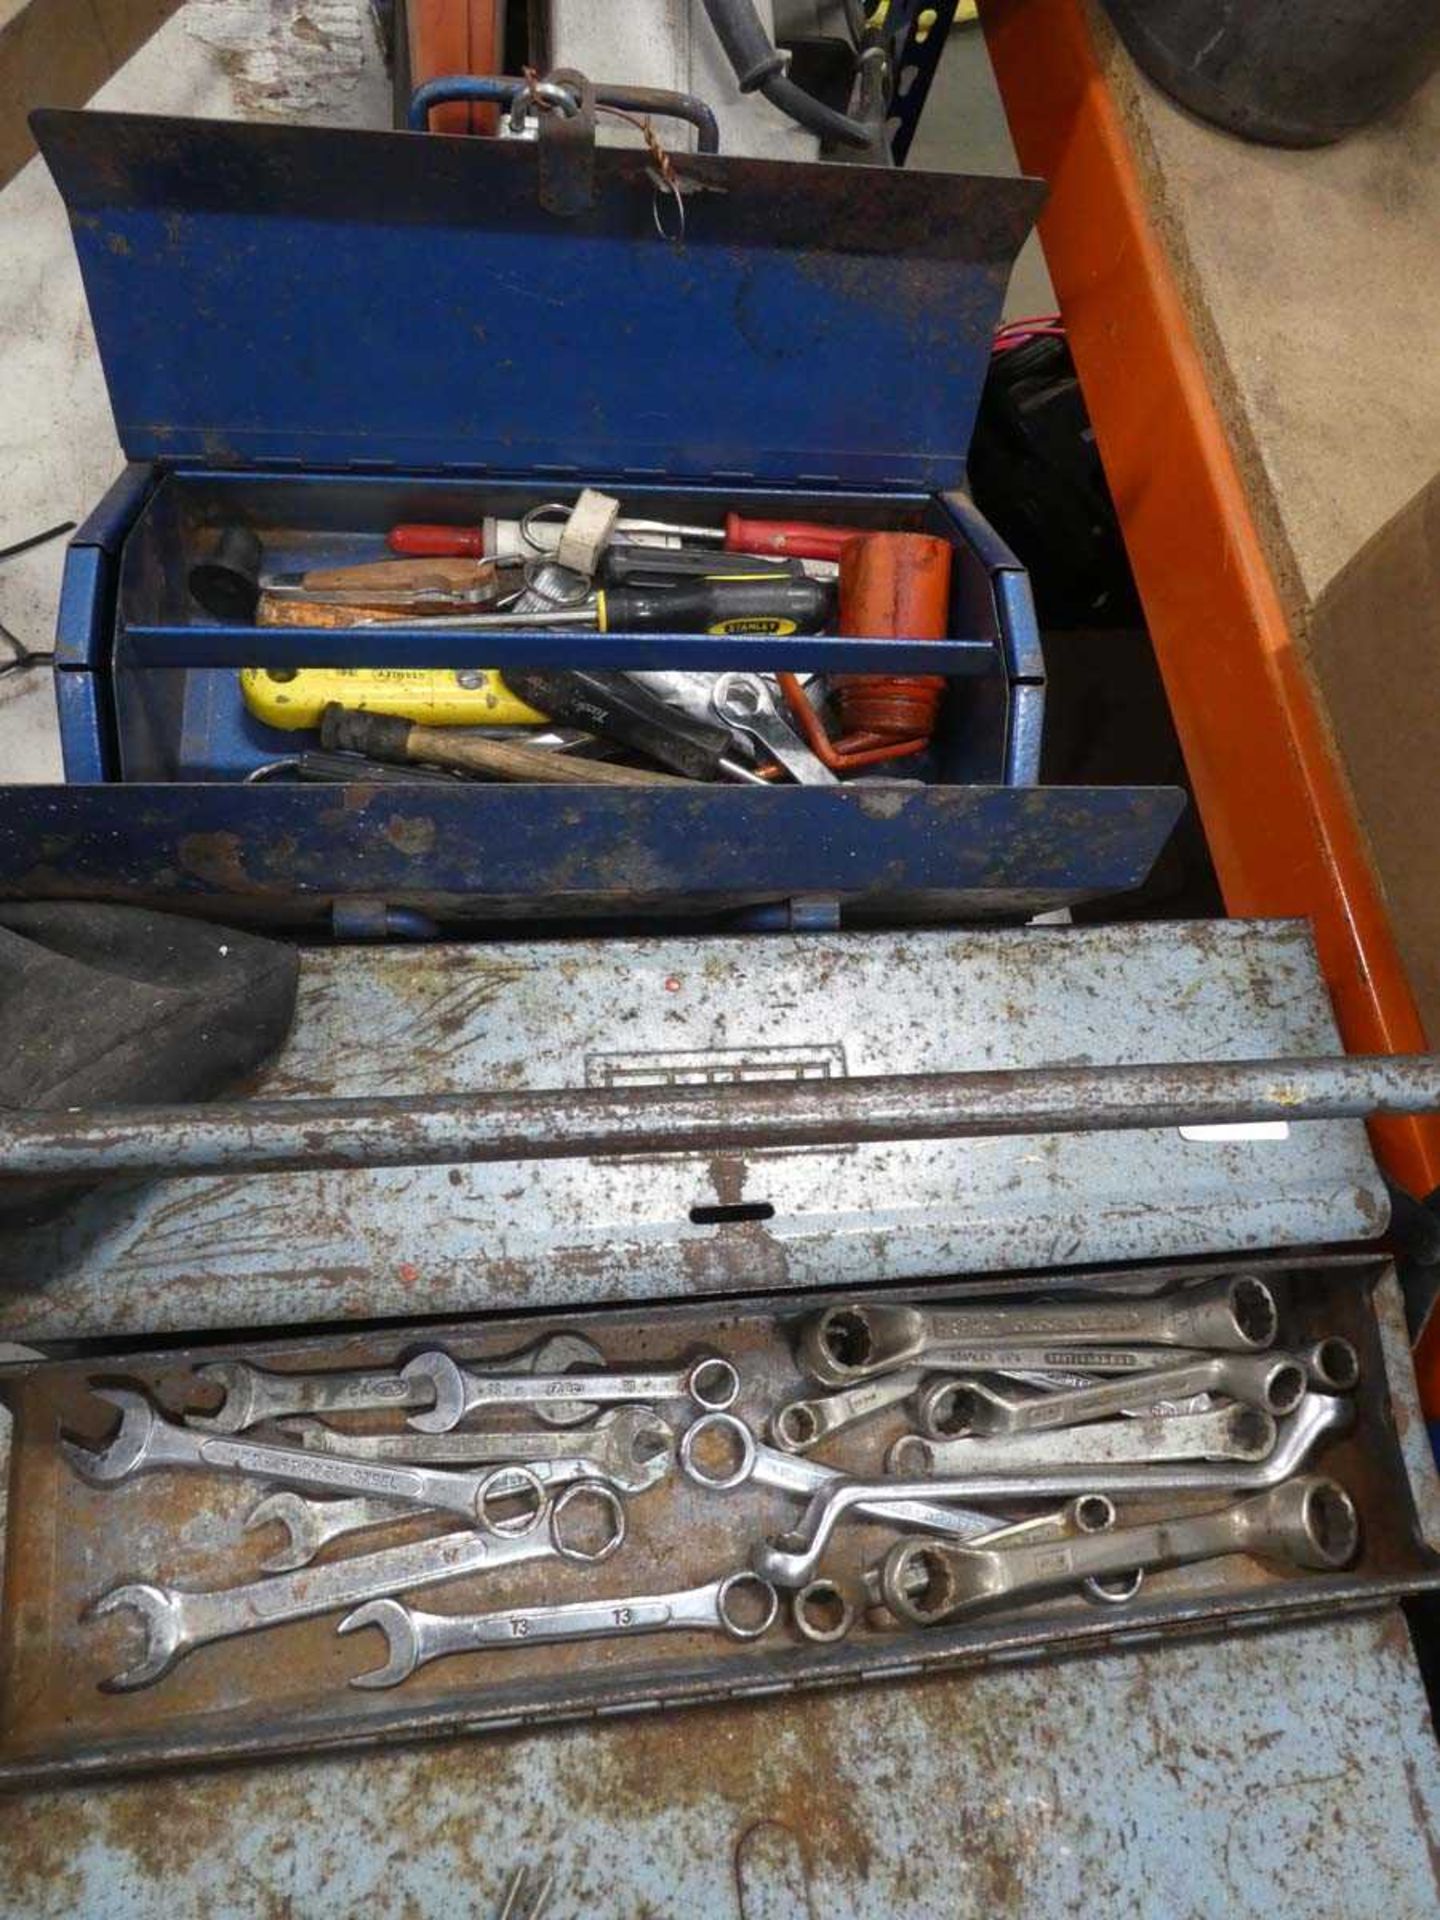 2x boxes assorted tools inc. spanners, screwdrivers, oil cans, sockets, etc.